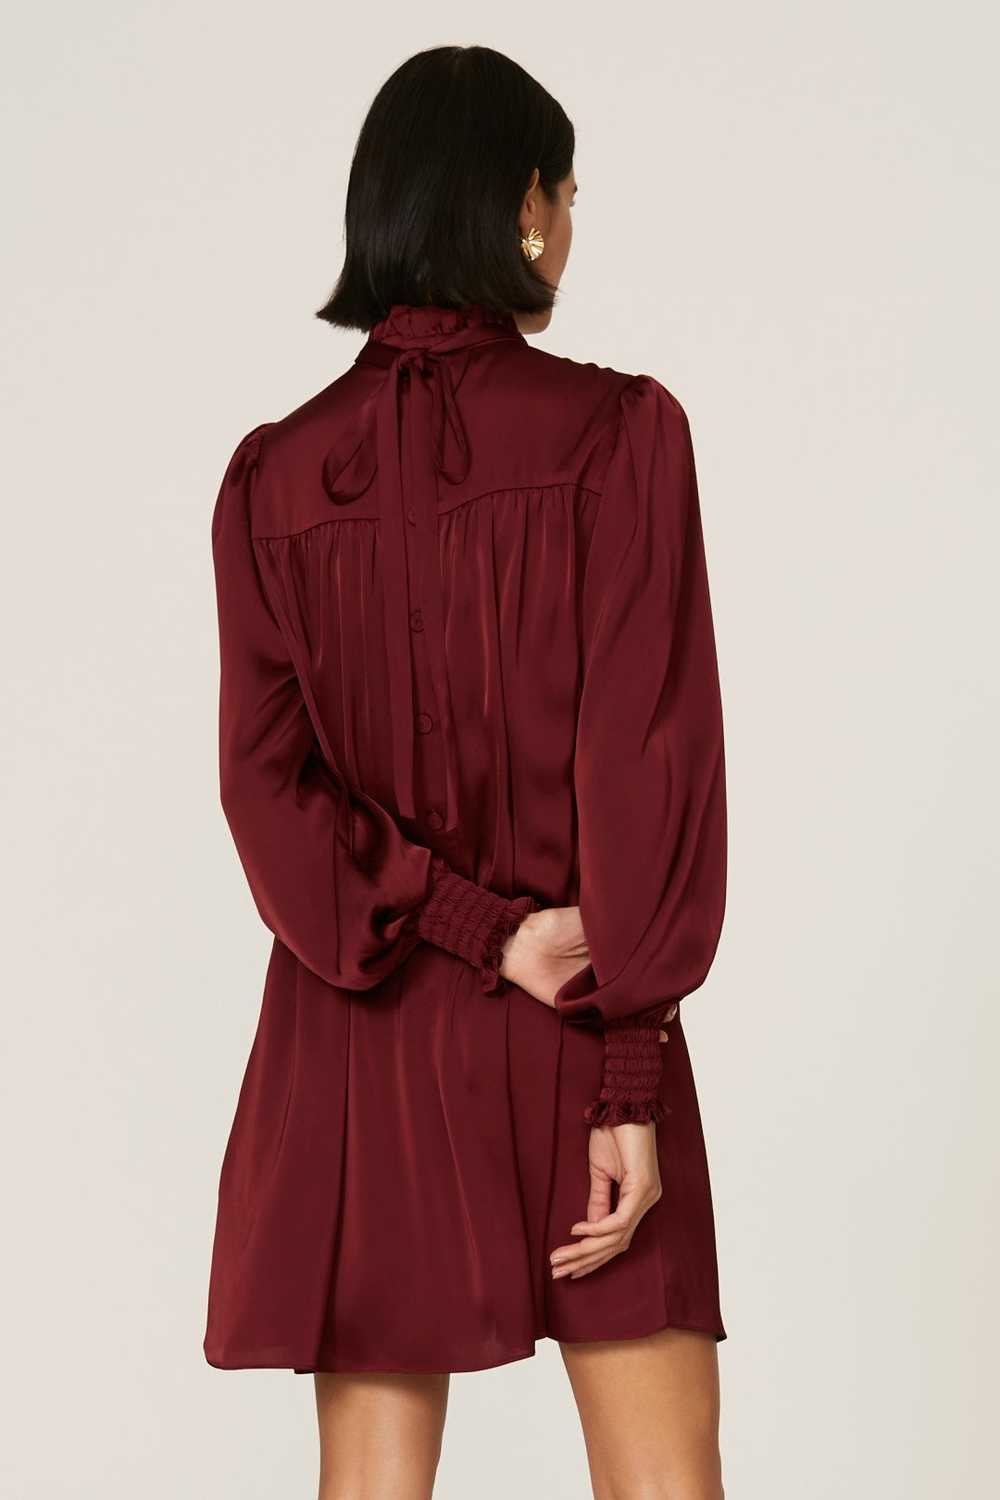 Adam Lippes Collective Ruffle Neck Charmeuse Dress - image 2